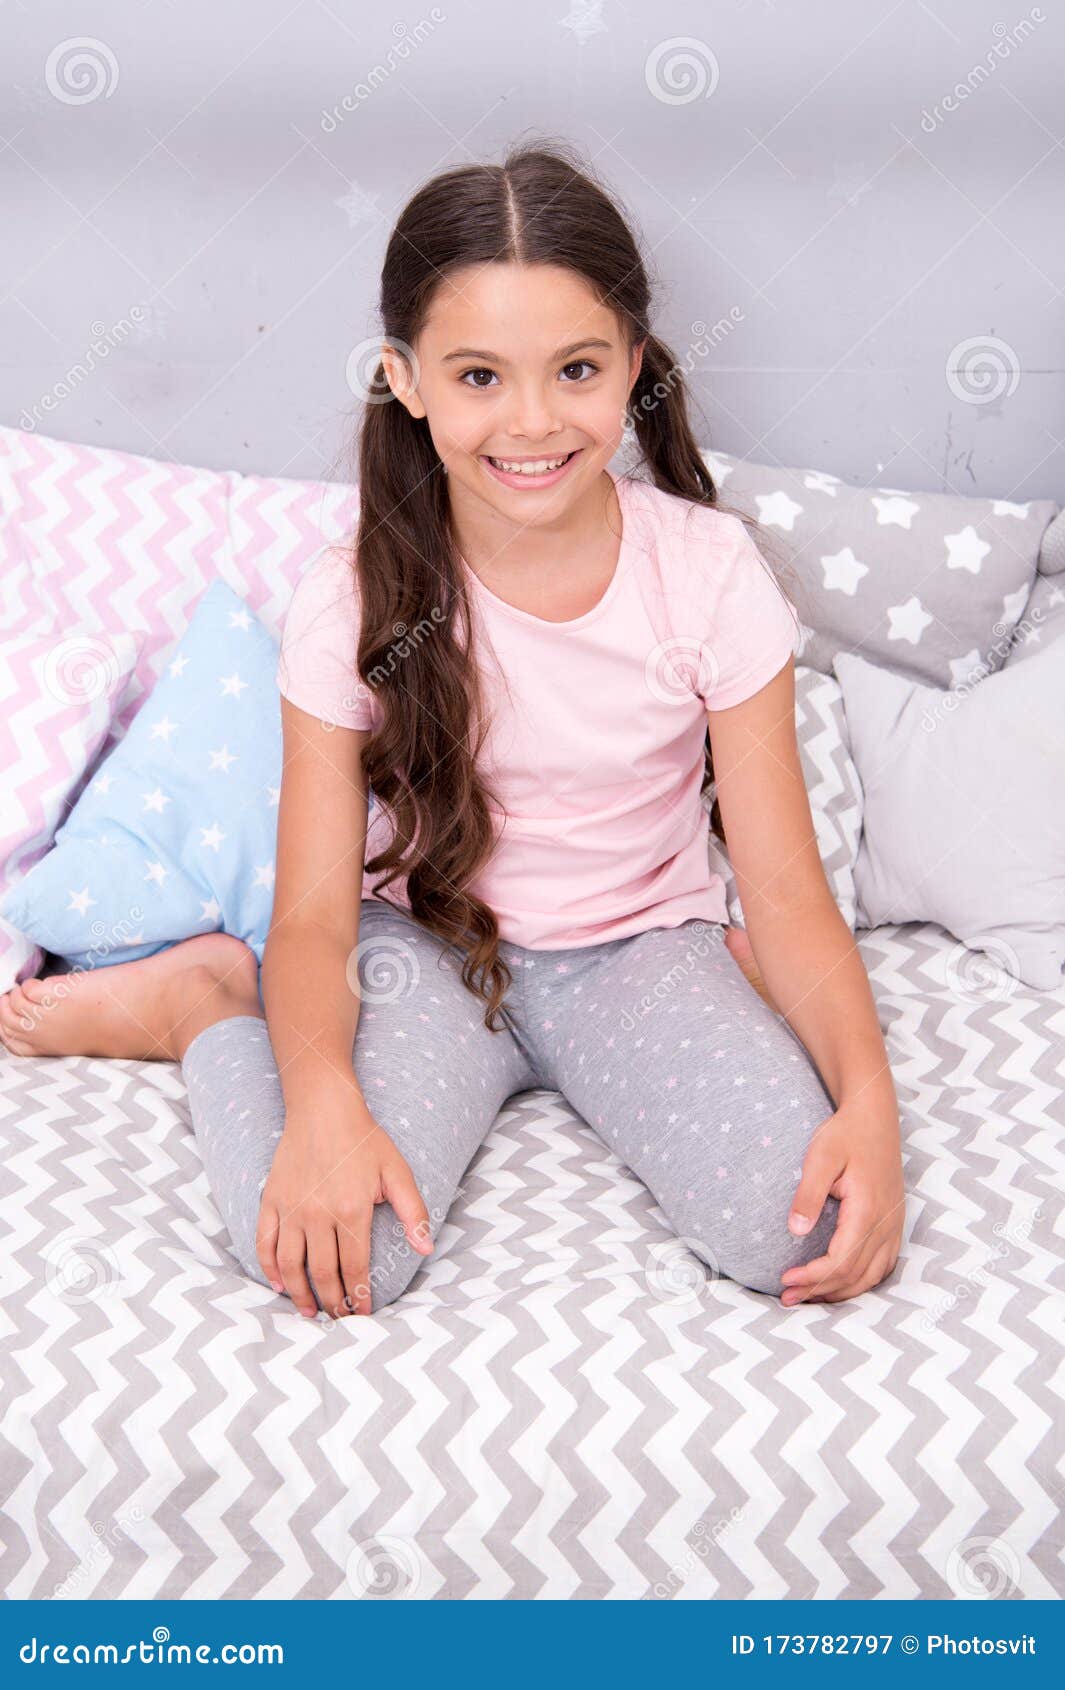 Relax and Ease Transition To Sleep. Little Girl Pajamas Ready for ...